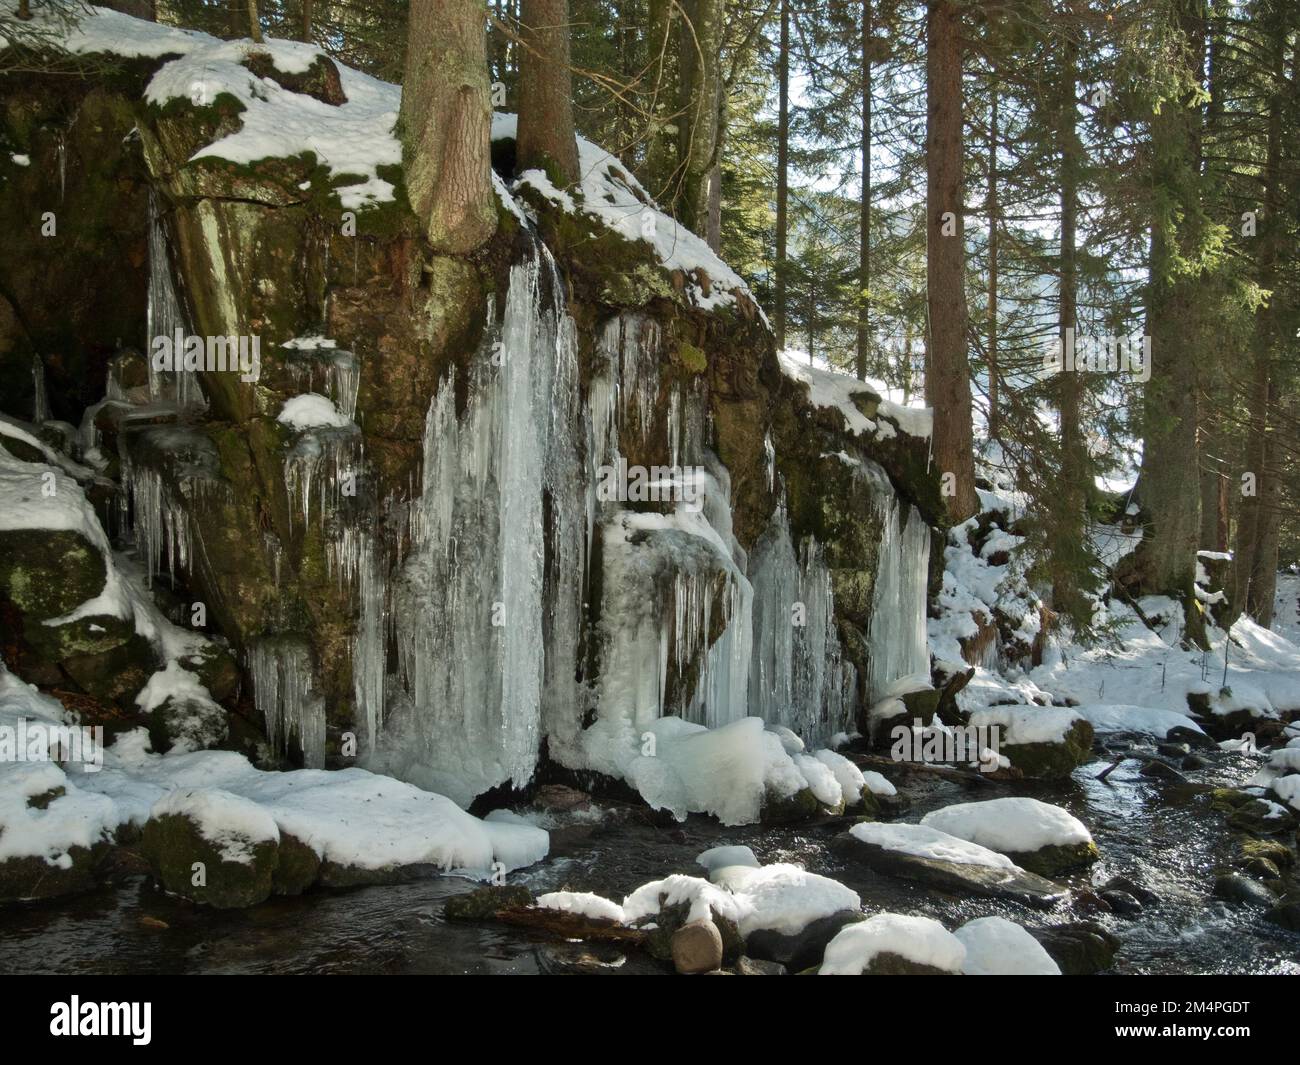 Icefall in the gorge of the Menzenschwander Alb, winter, St. Blasien, Black Forest, Germany Stock Photo